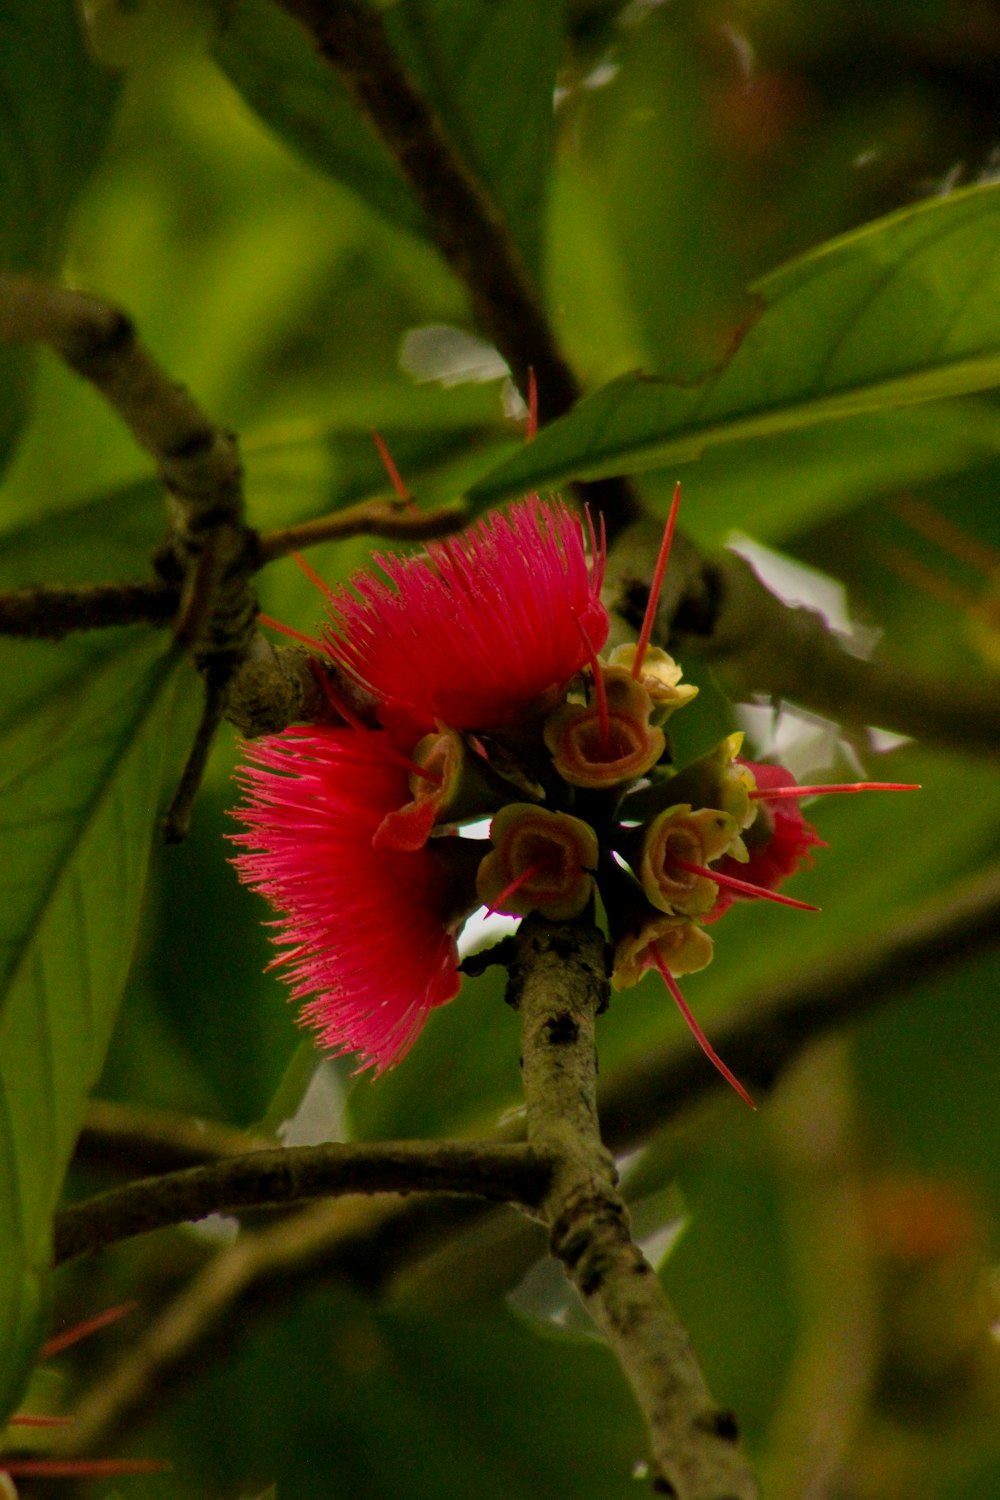 a red flower on a tree branch with green leaves